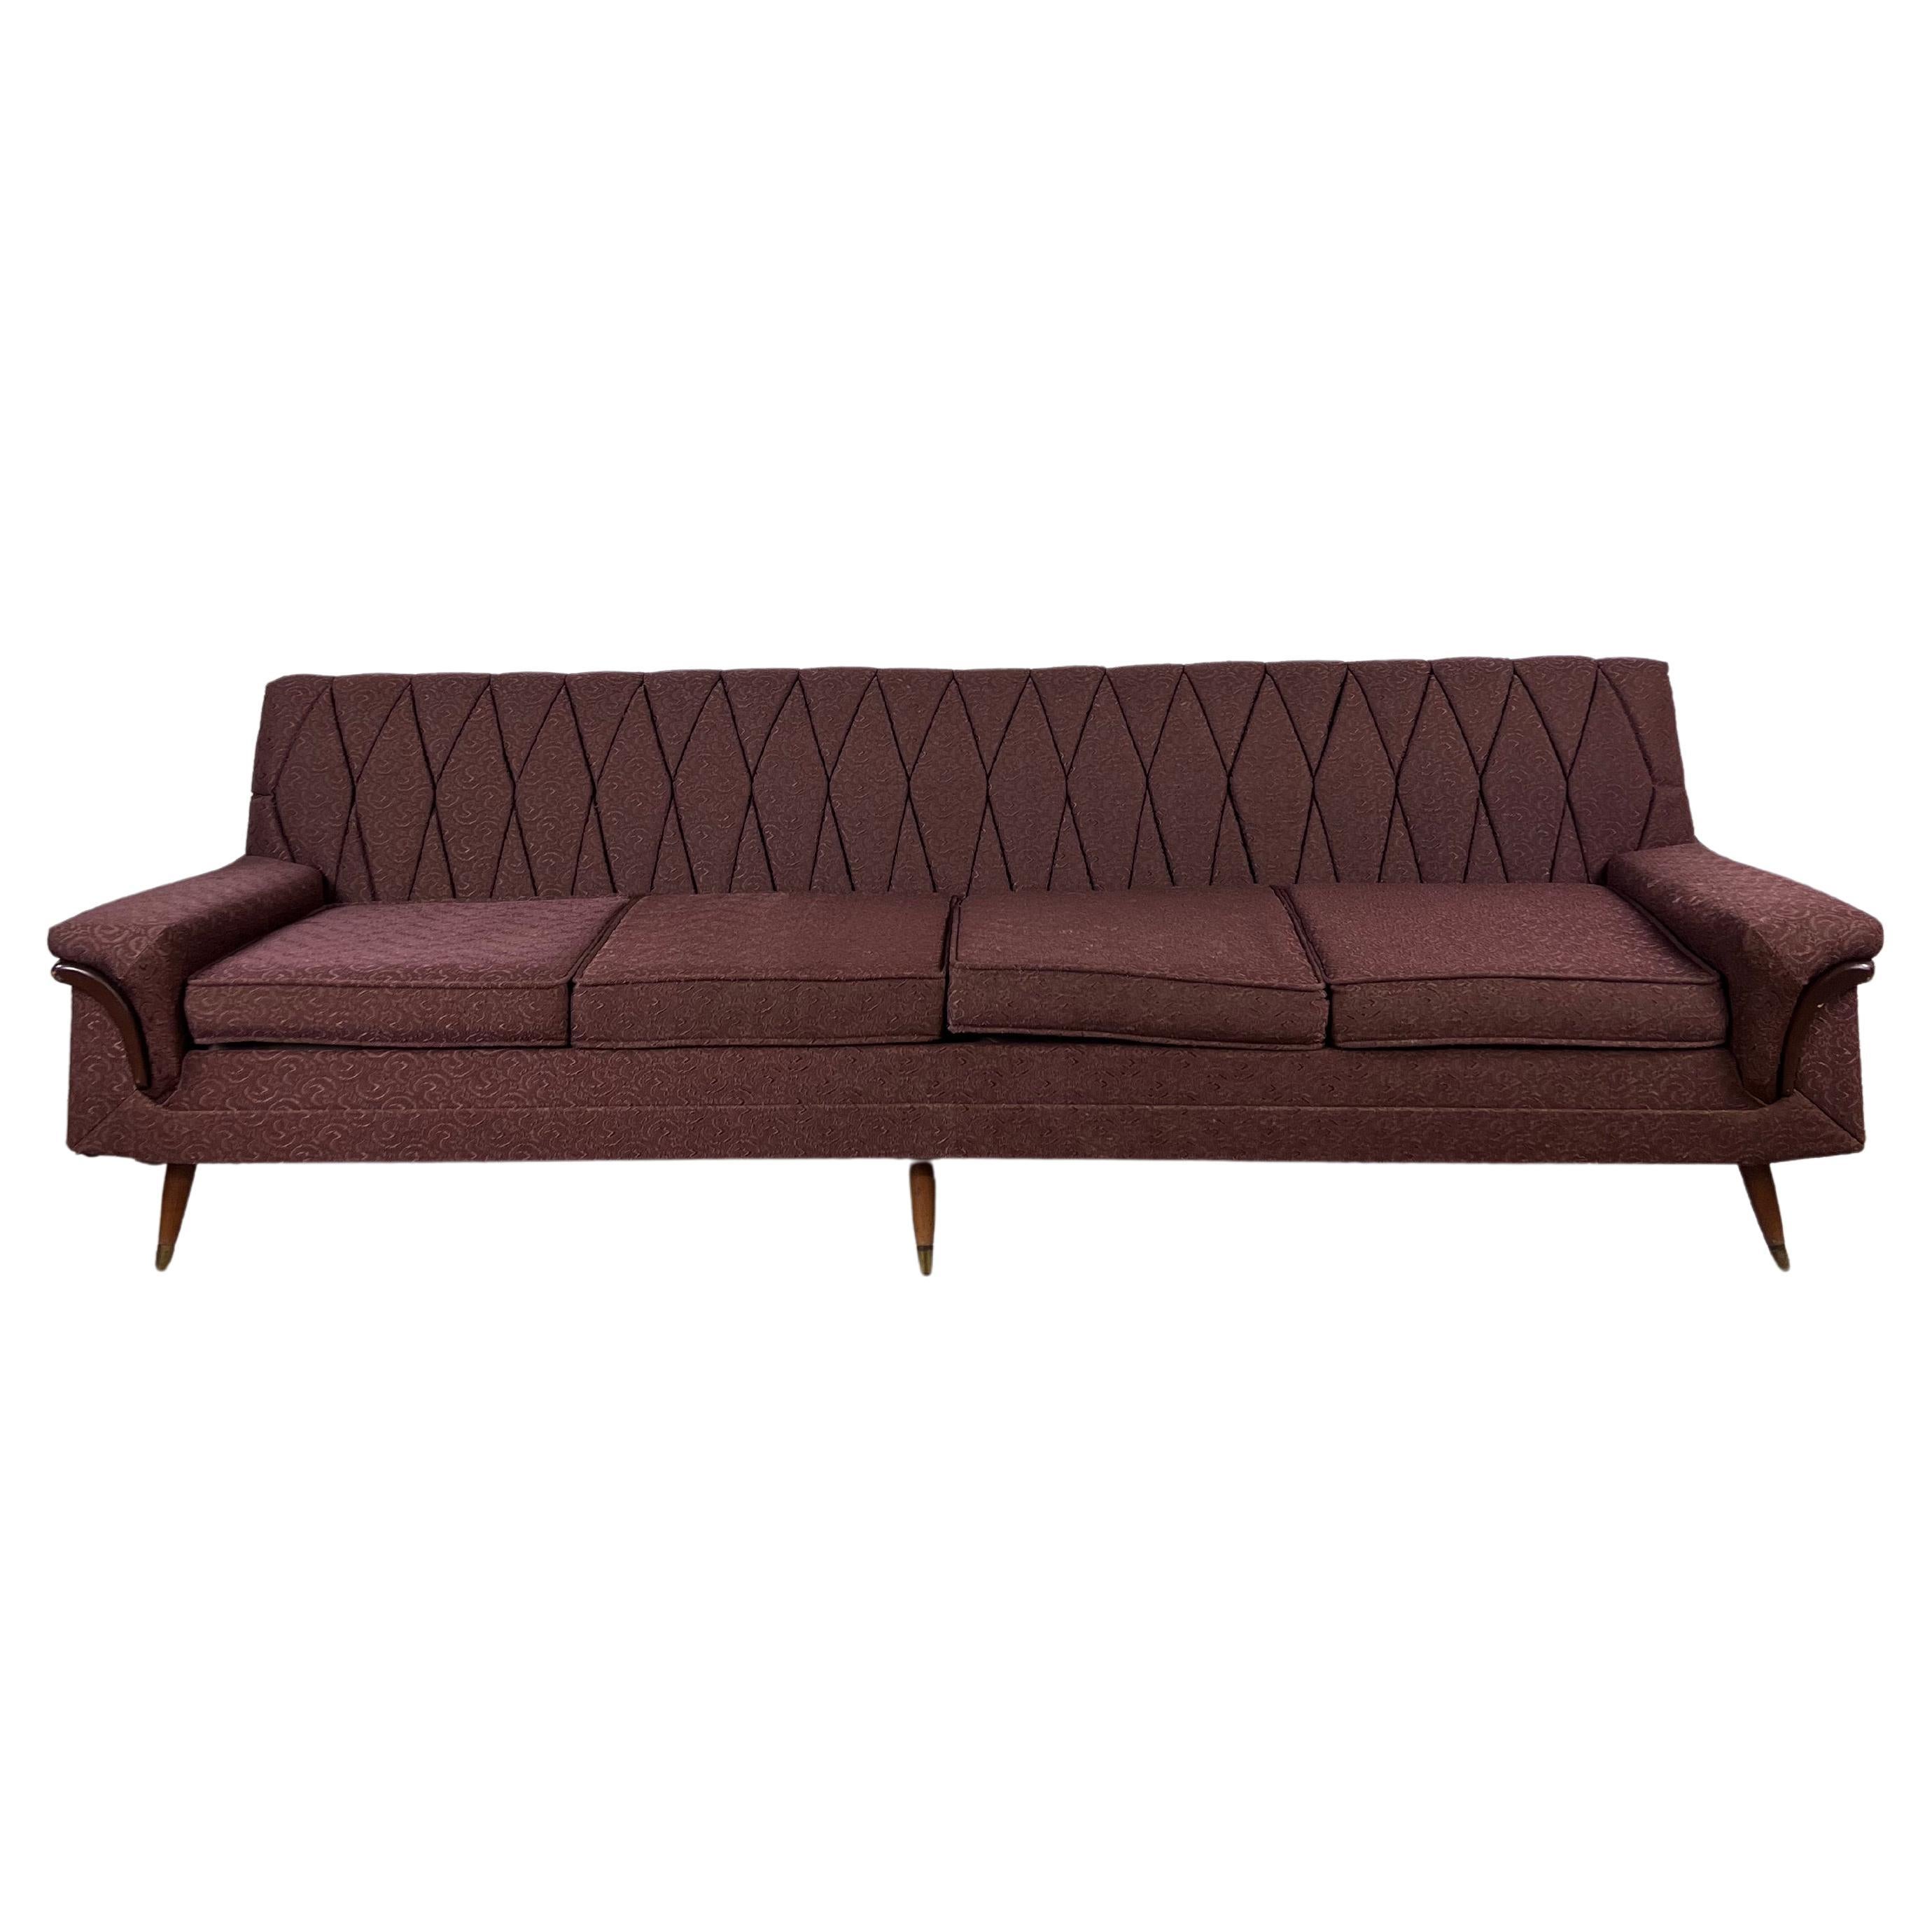 What is the L shaped couch called?